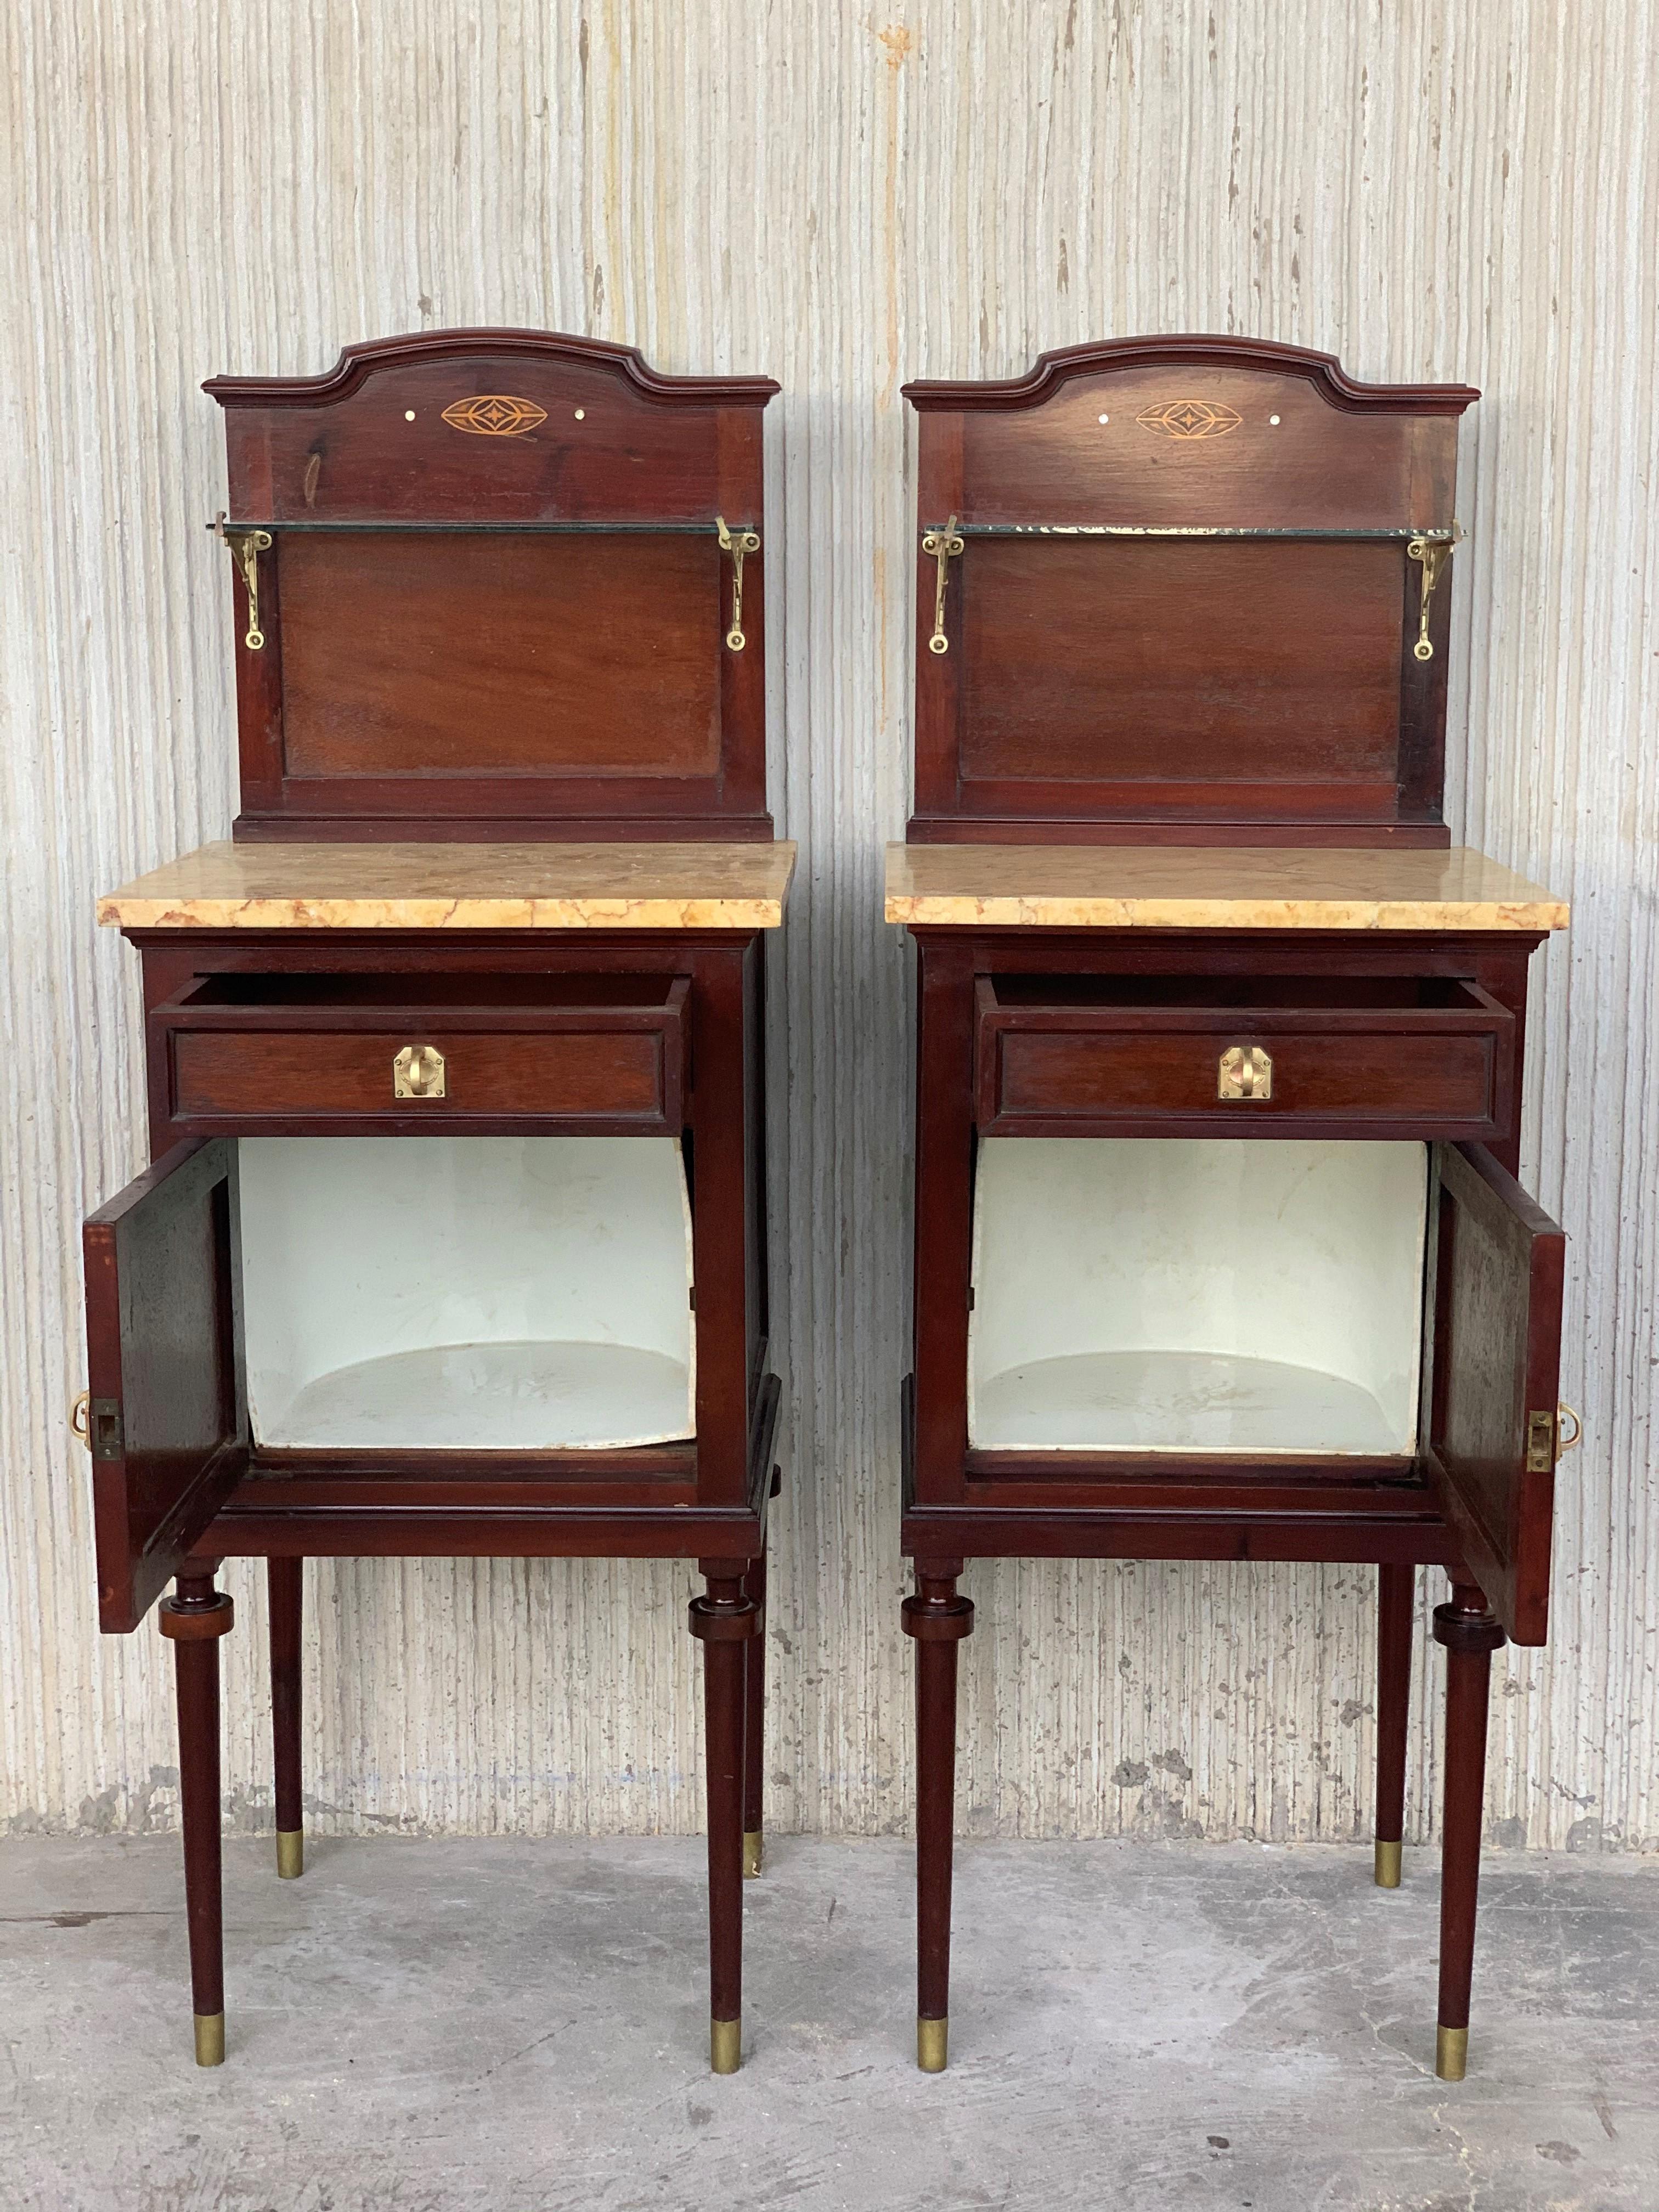 20th Century Art Nouveau Pair of Walnut Nightstands with Crest, Marble Top and Glass Shelve For Sale